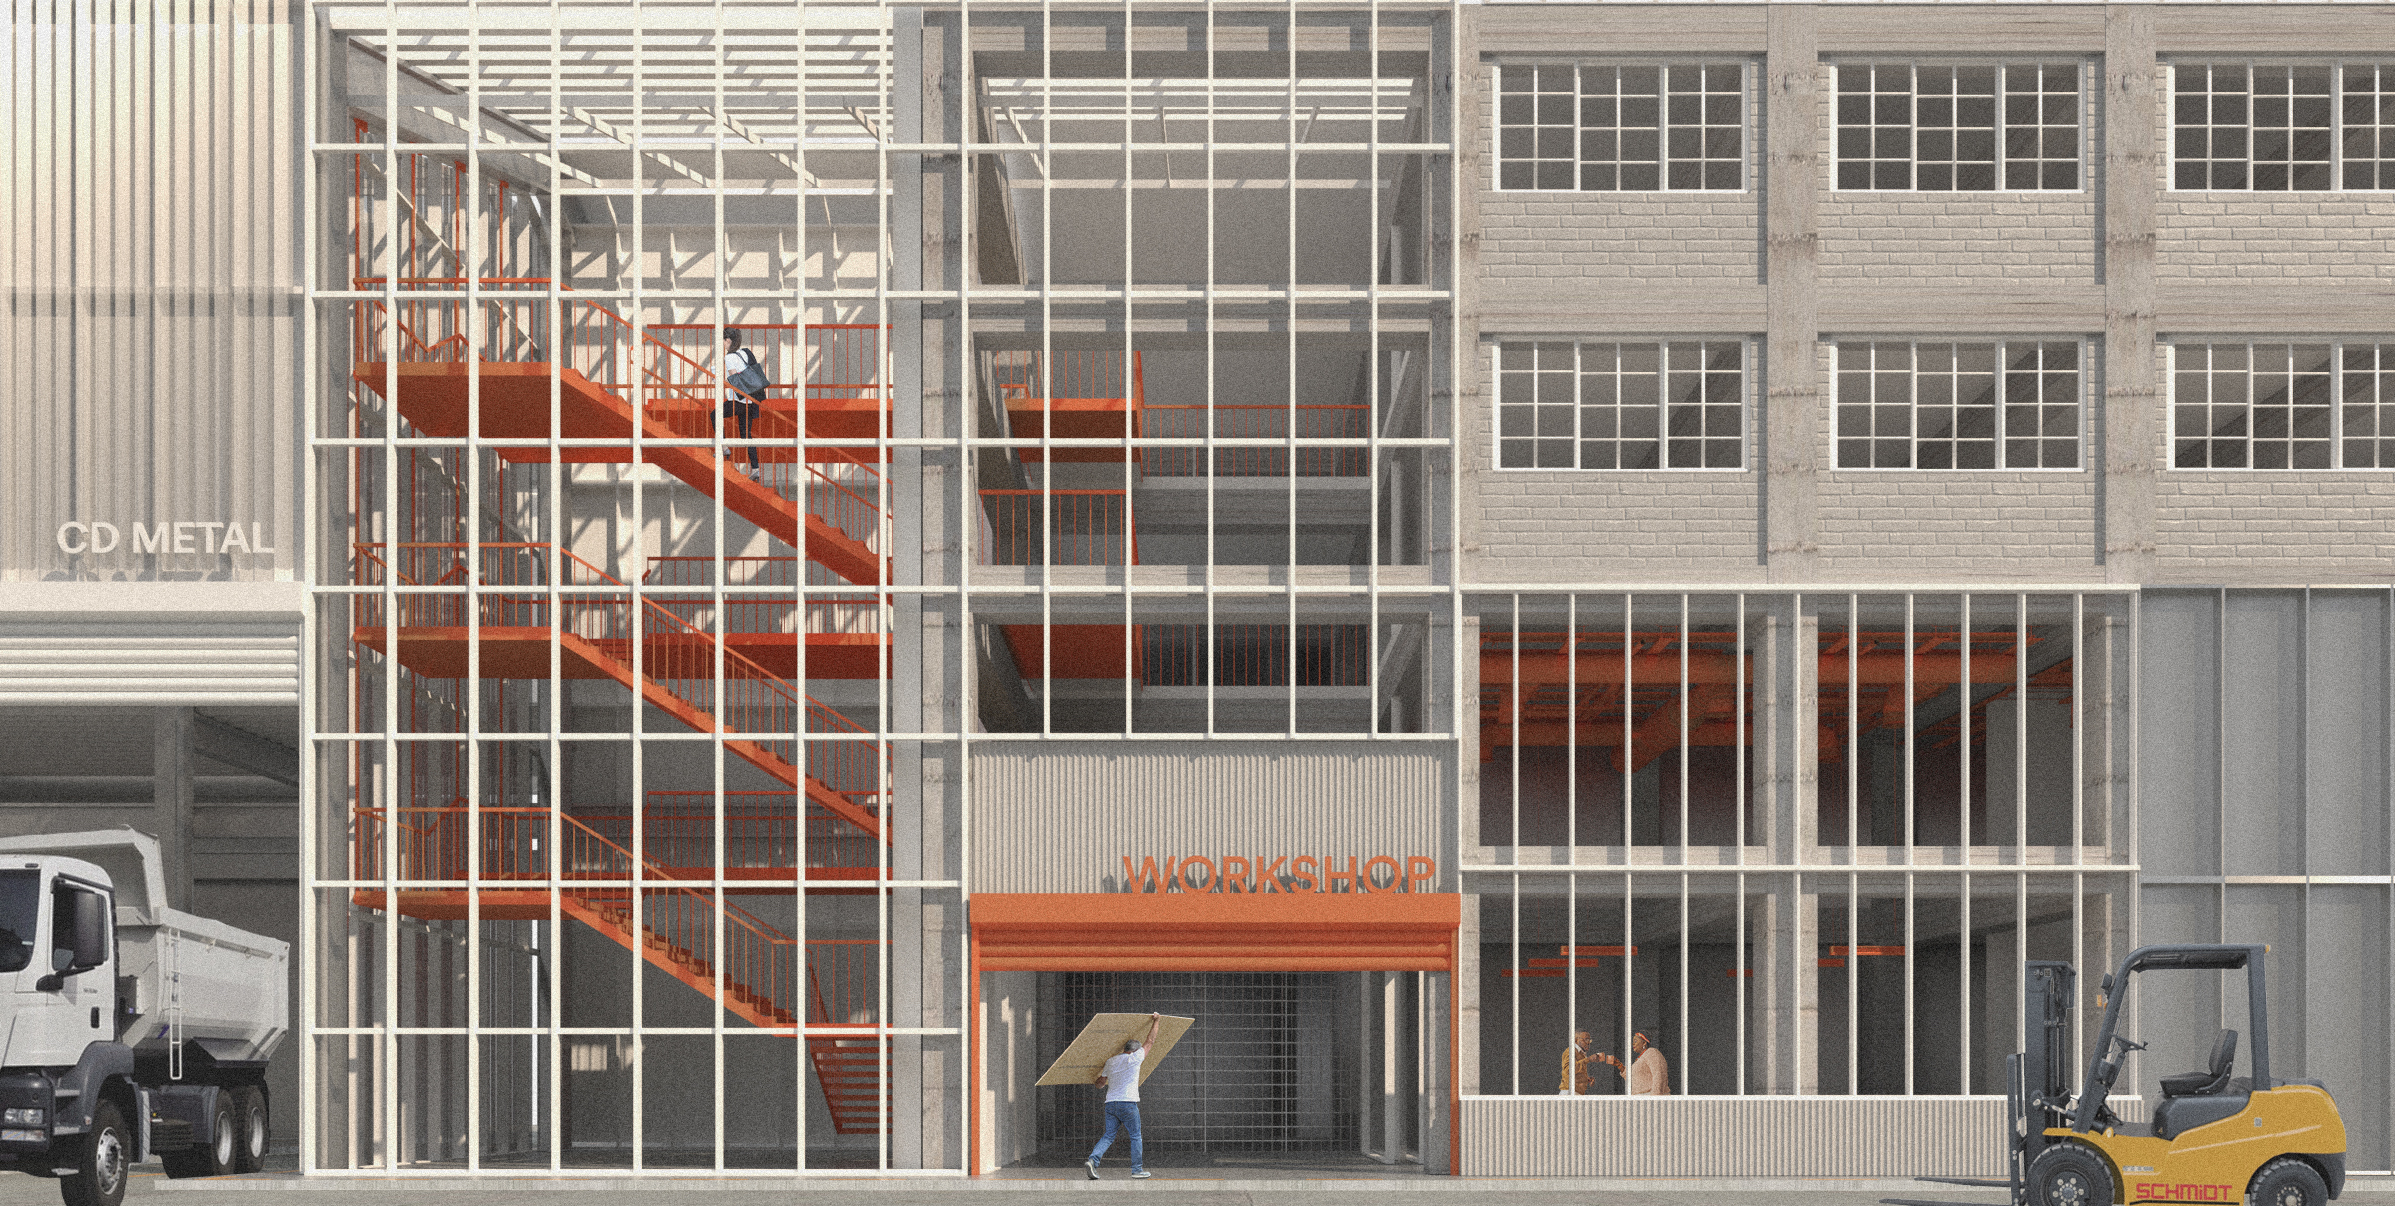 render showing the material expression and entrance. The entrance is framed in orange which is also seen in the staircase. The staircase is visible due to its glass exterior.